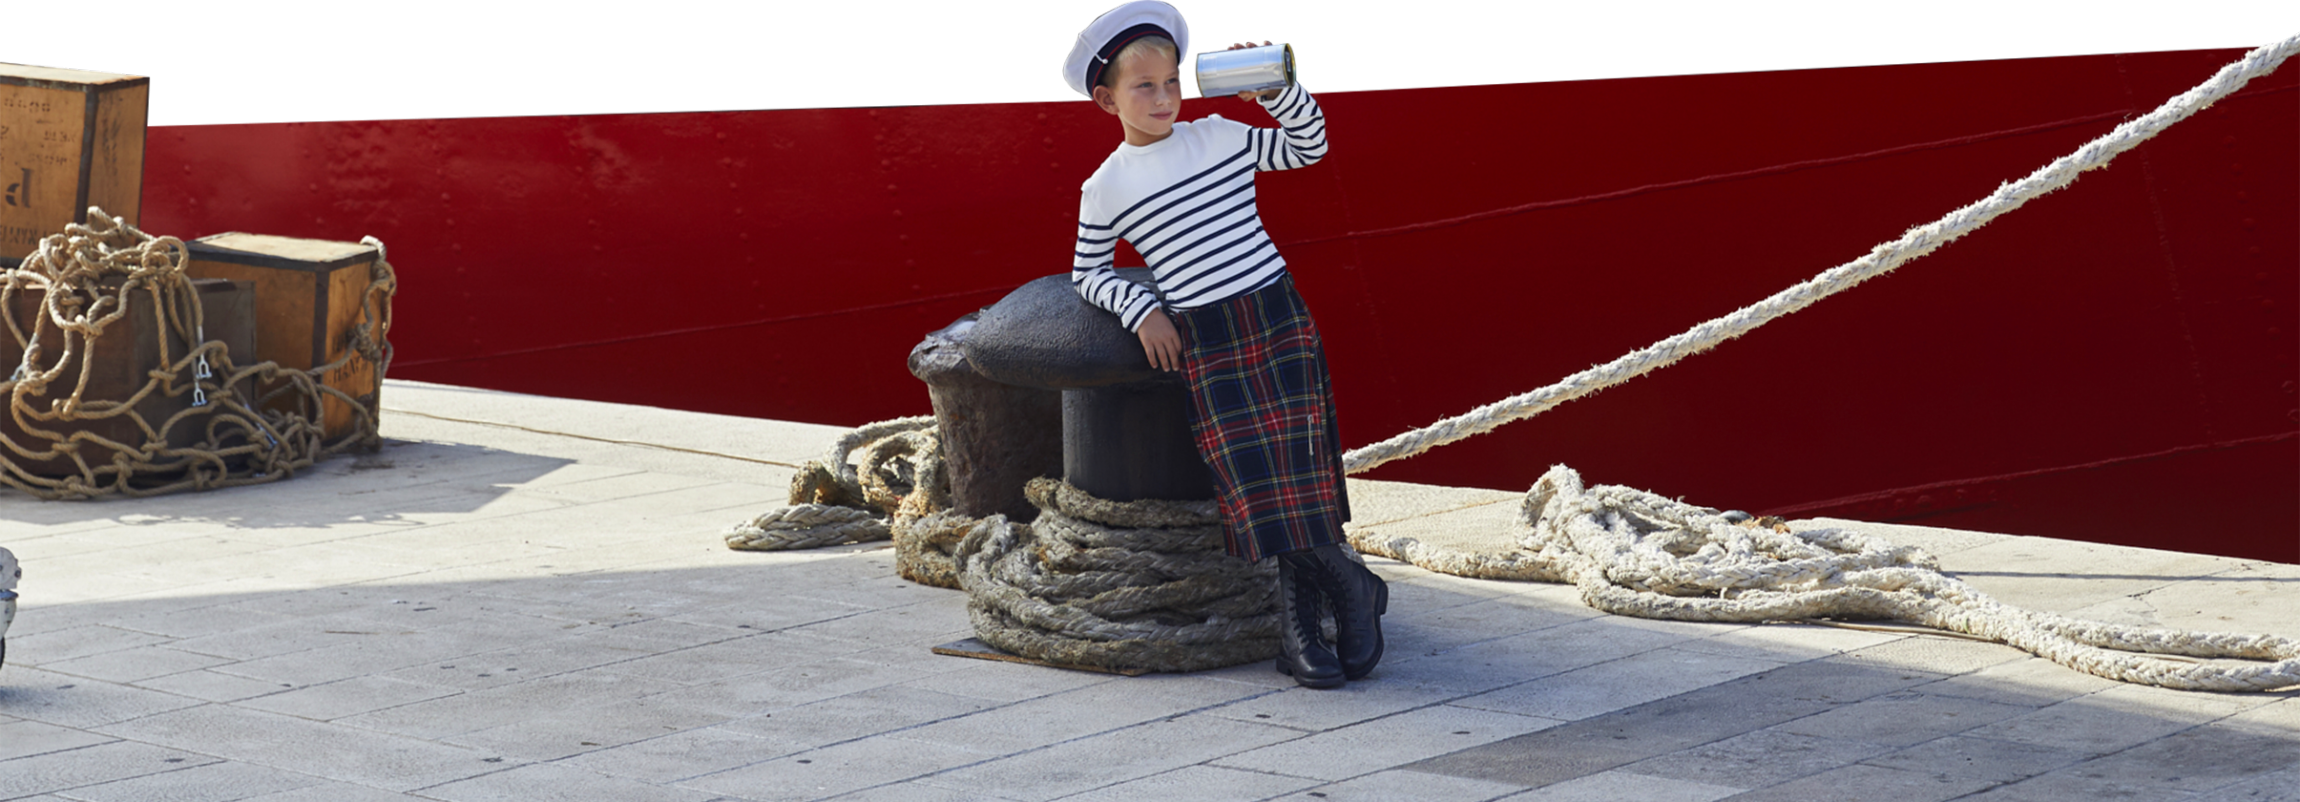 Visual of the new campaign with with a child in a kilt and striped shirt at quay holding a bottle of perfume like a long sight